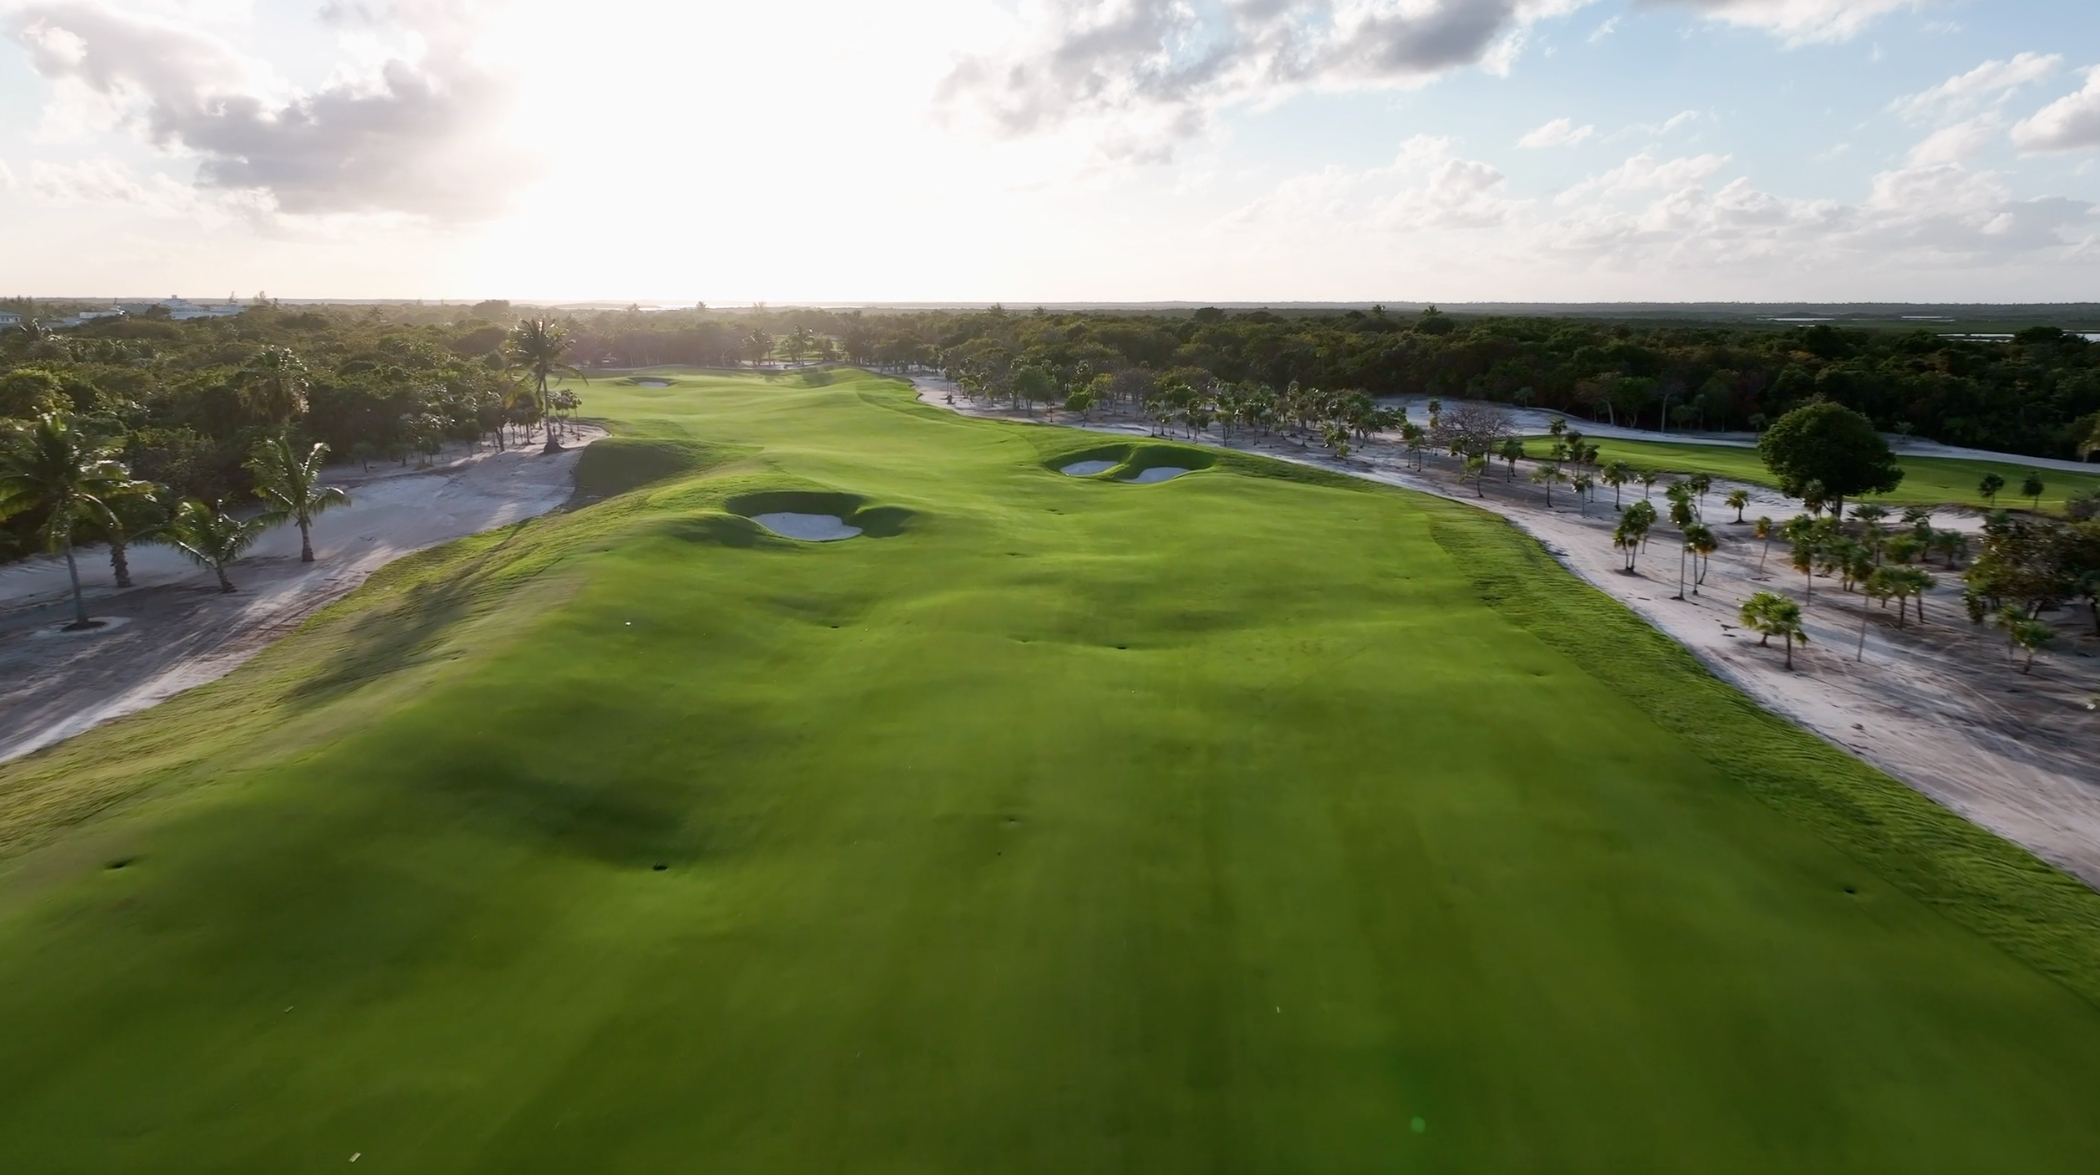 Aerial shot of Hole 2 from The Abaco Club golf course